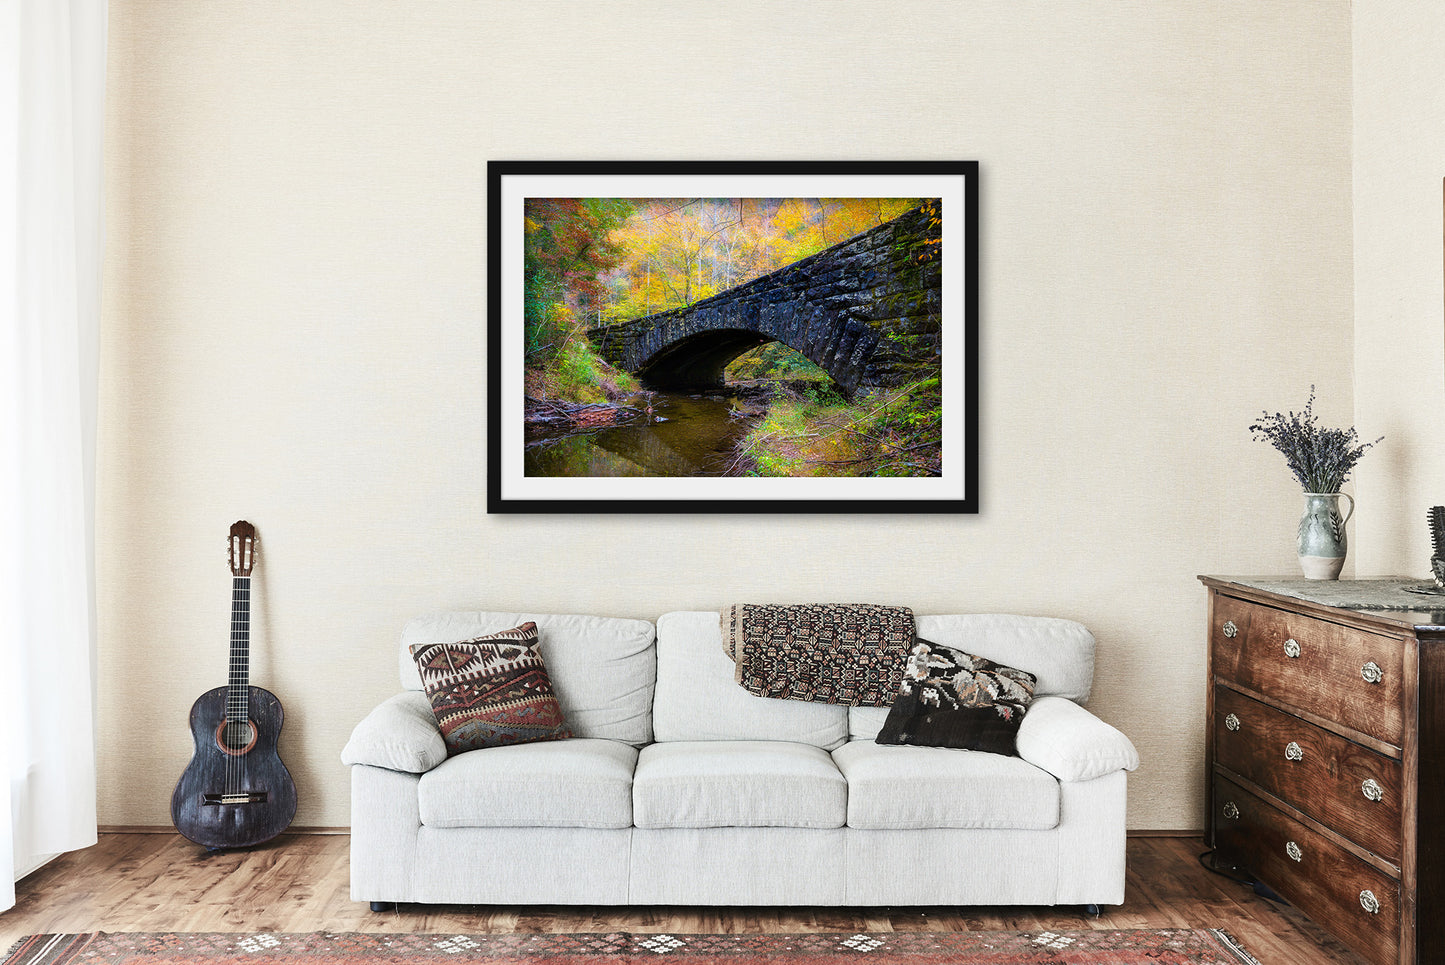 Framed Great Smoky Mountains Print with Optional Mat (Ready to Hang) Picture of Stone Bridge Over Laurel Creek Surrounded by Fall Color in Tennessee Forest Wall Art Country Decor